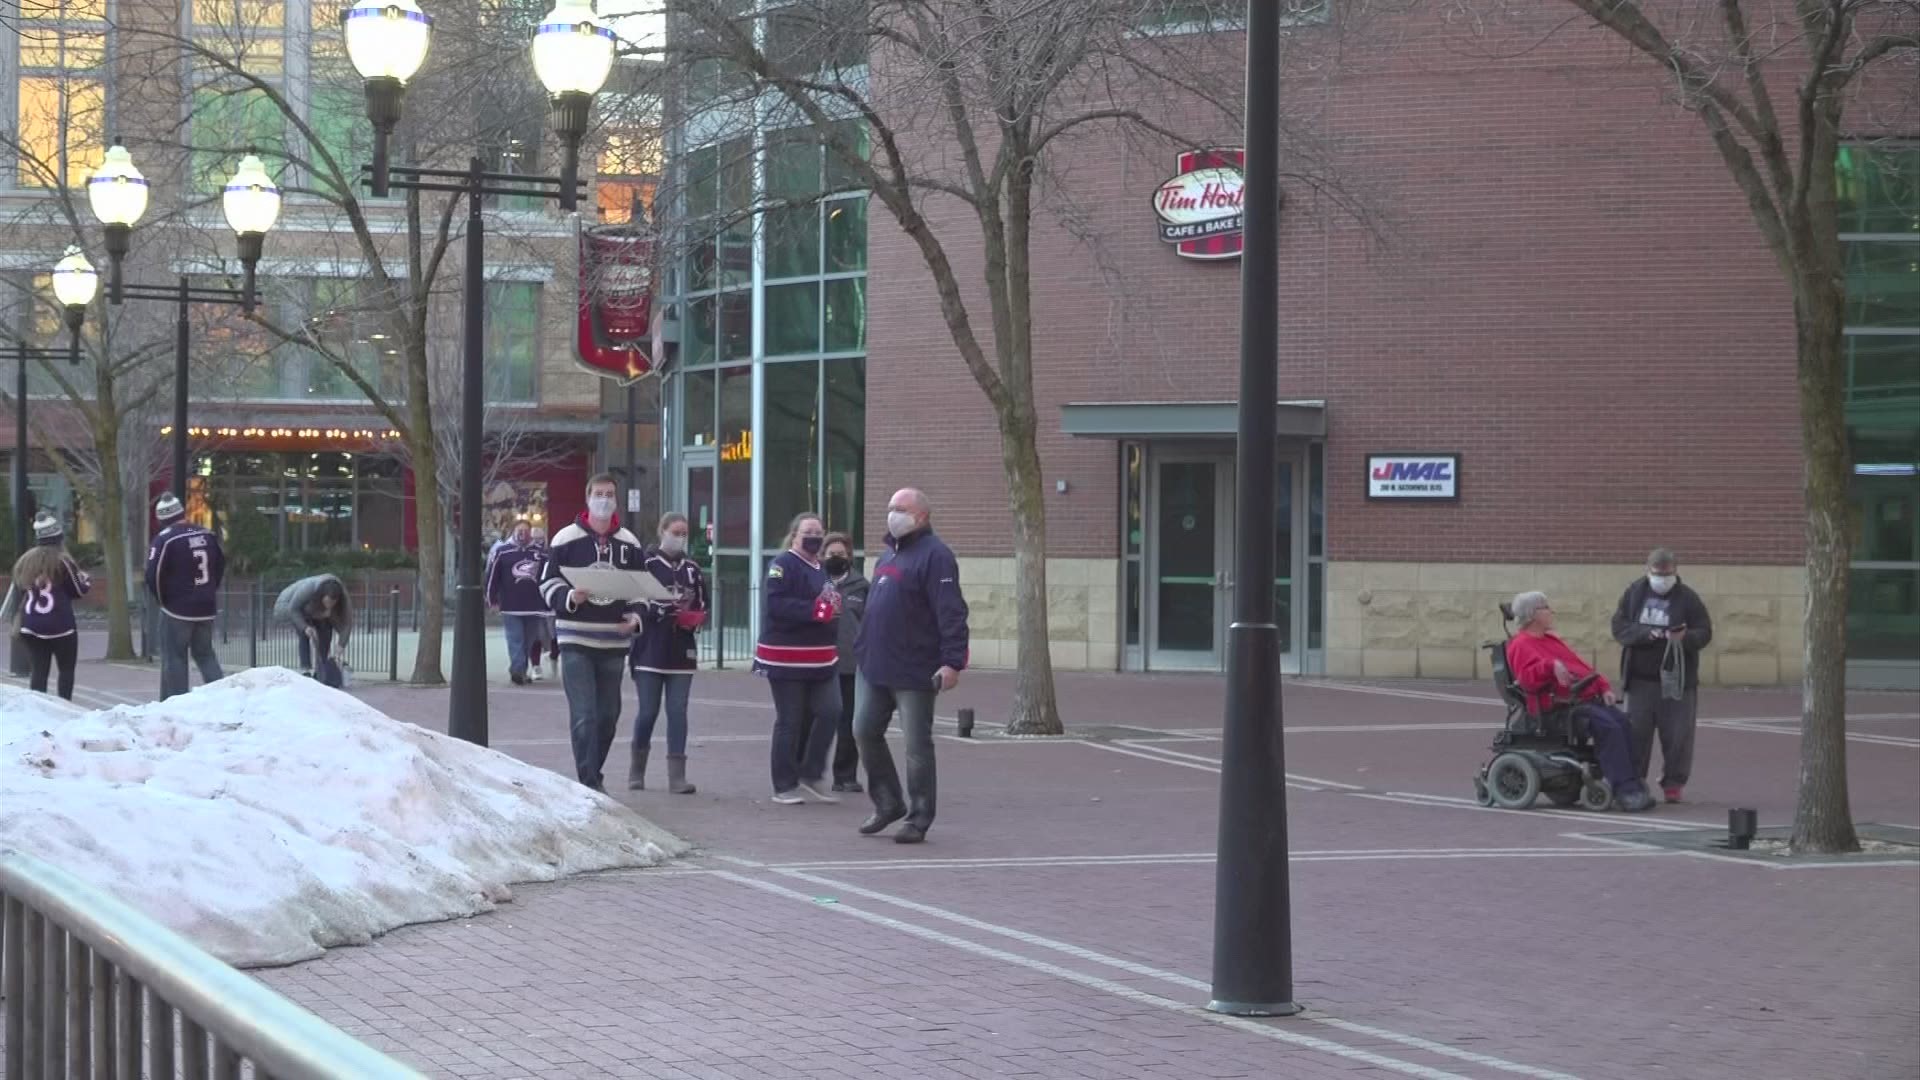 It was the first time in just more than a year any fans were able to be inside the Nationwide Arena for a game.